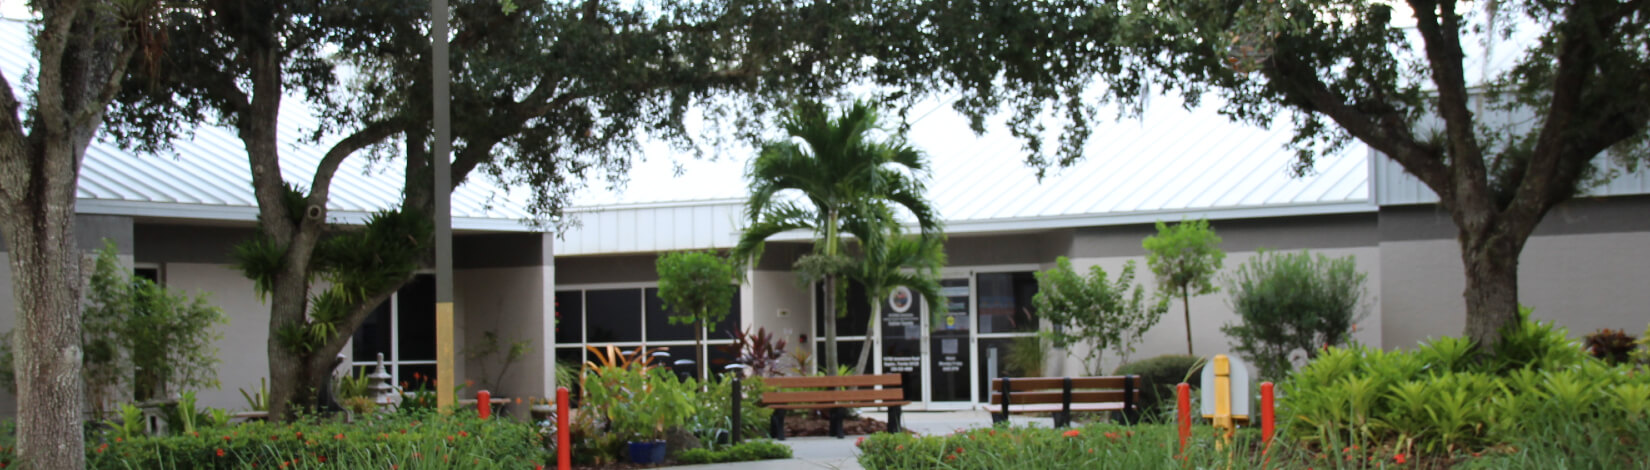 Collier County Extension Building 